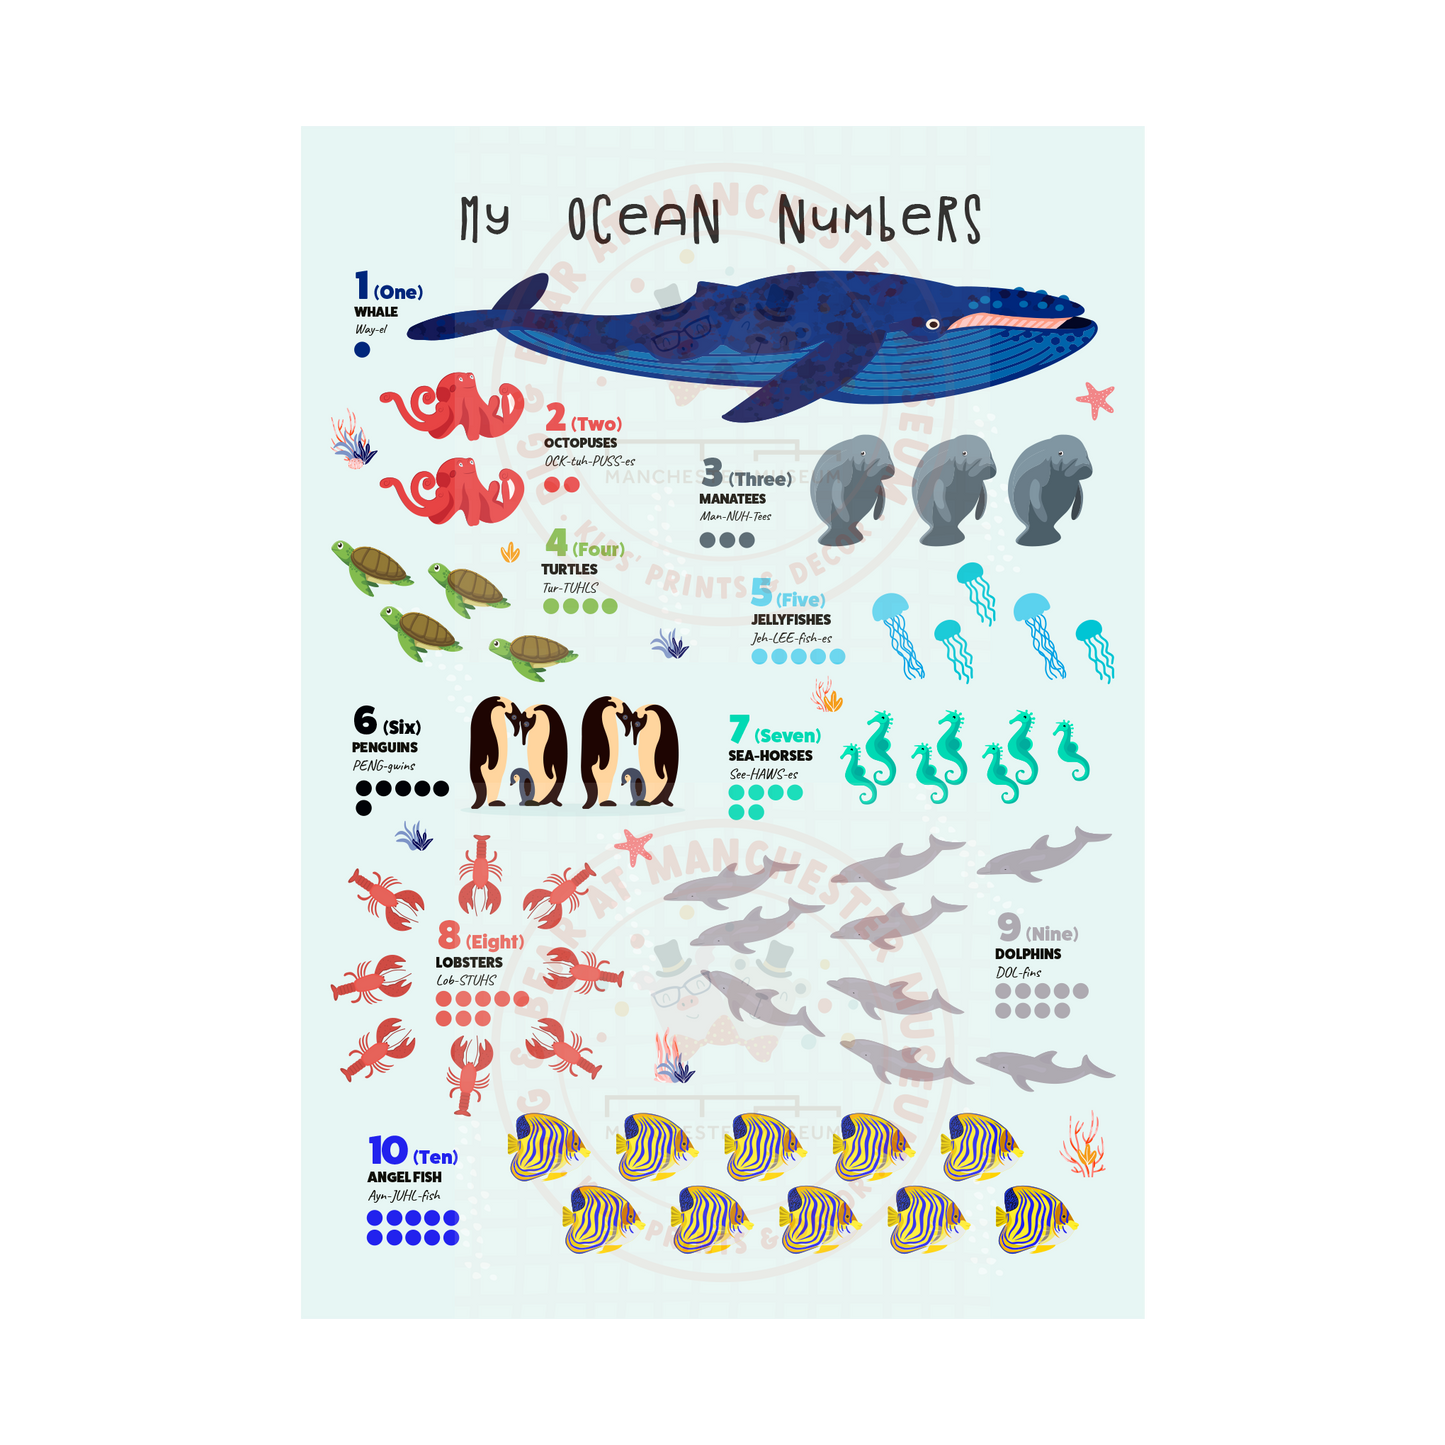 Print with the headline text, my ocean numbers. Ocean wildlife in groups of numbers from one large whale to ten small fish at the bottom.